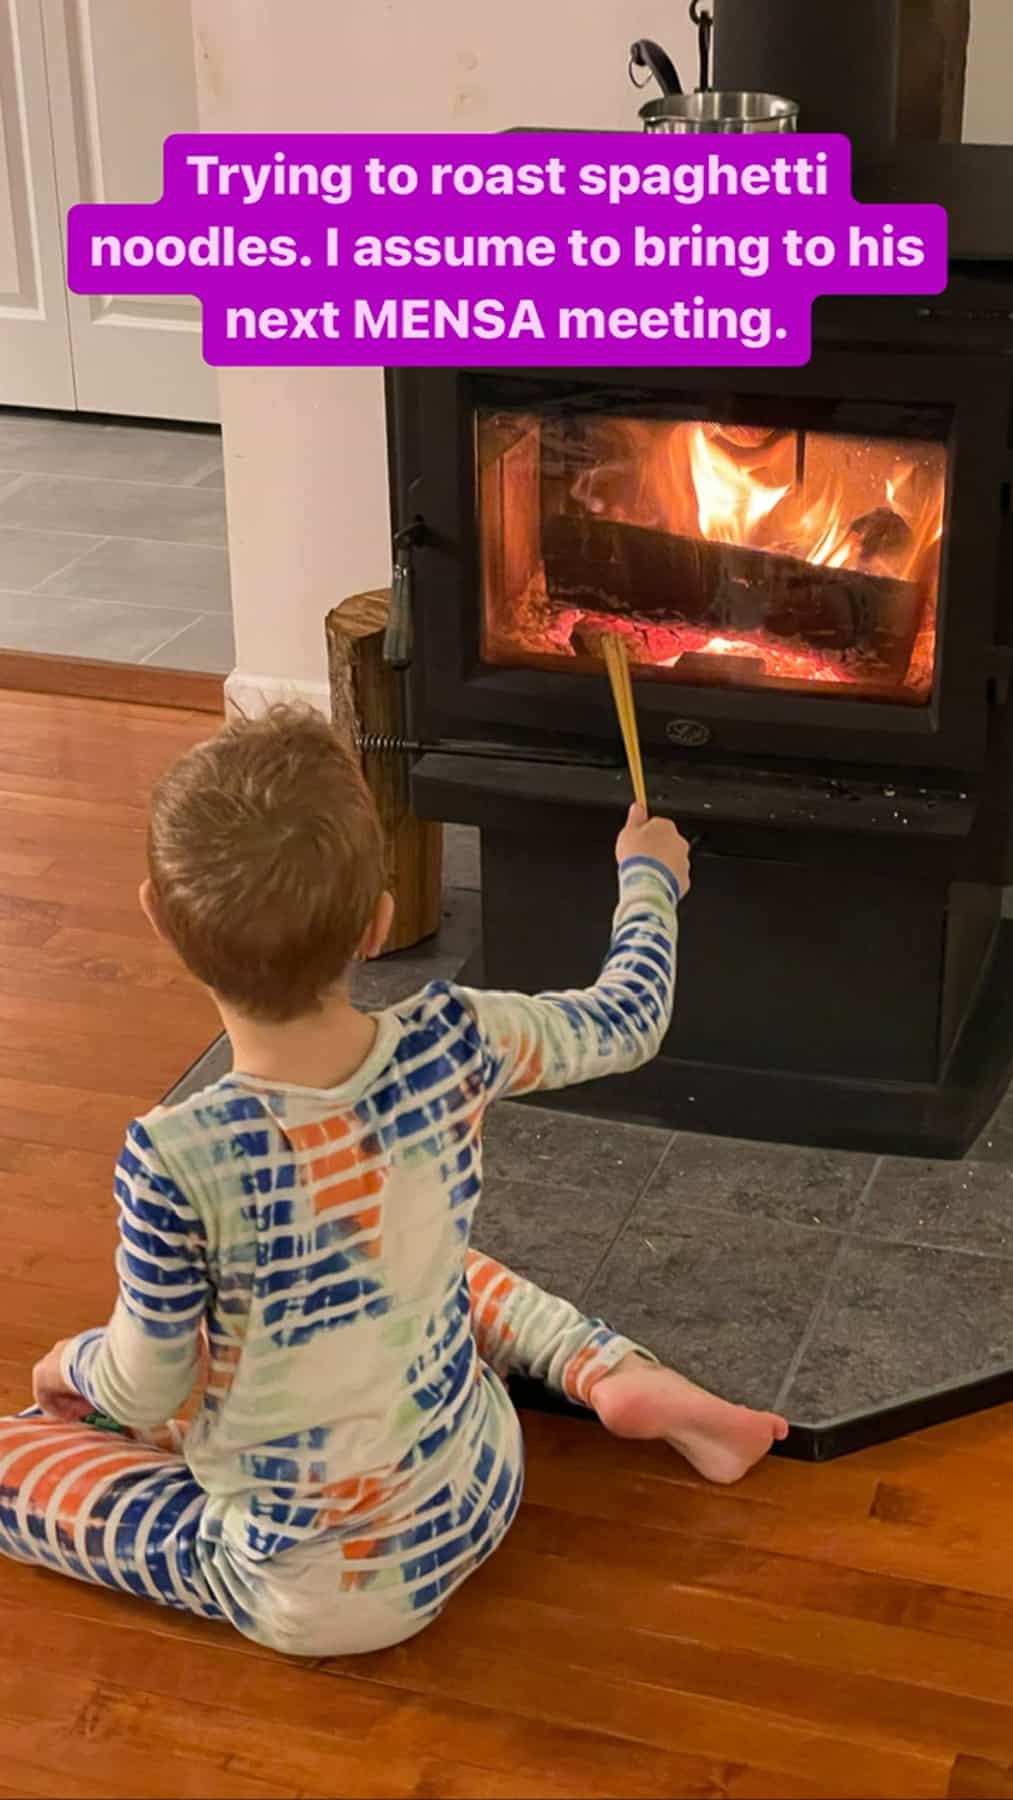 a kid in front of a woodstove holding spaghetti noodles.